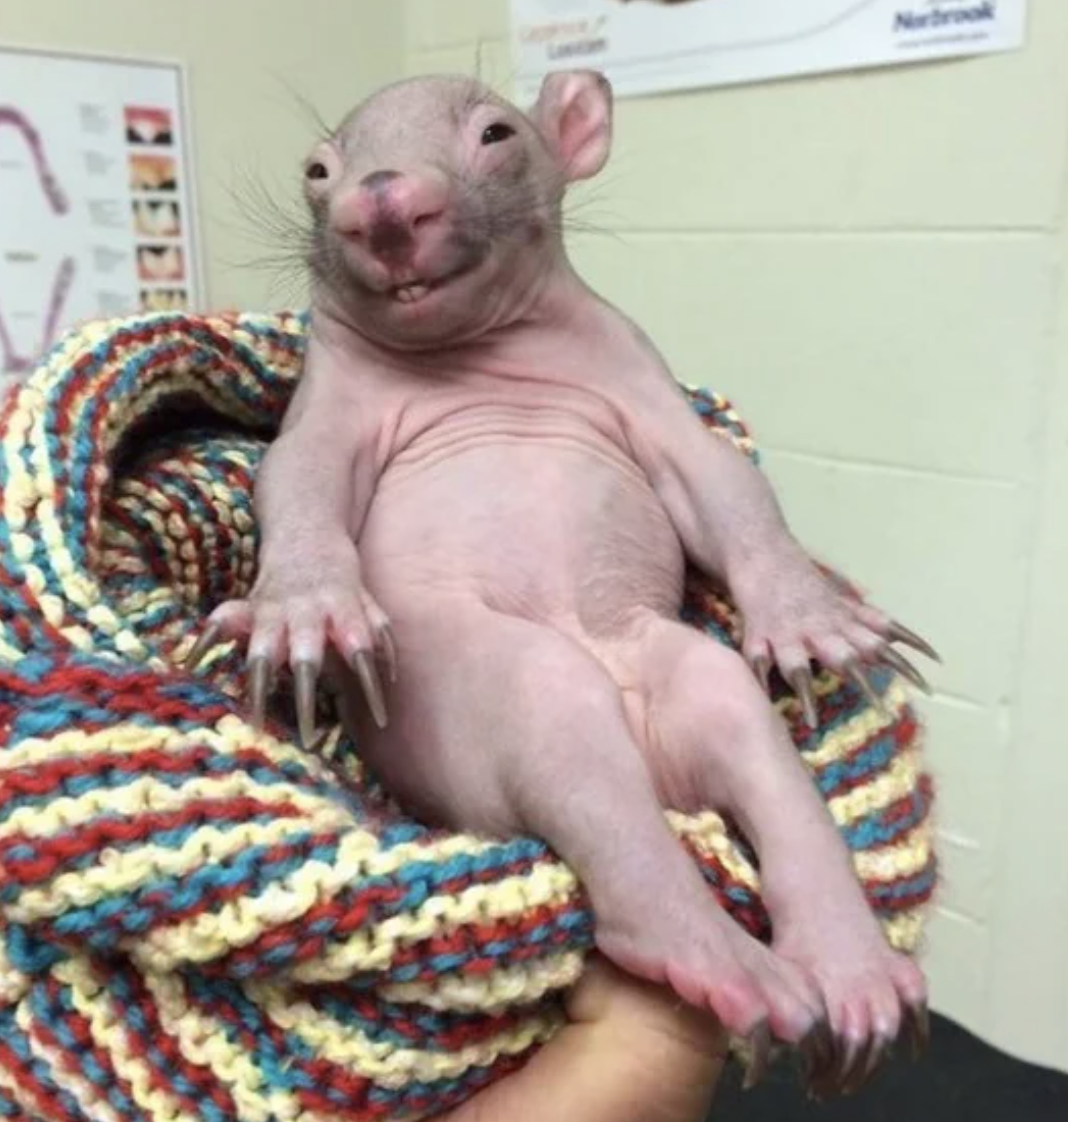 Hairless baby marsupial nestled in a knitted blanket, held in someone&#x27;s hand